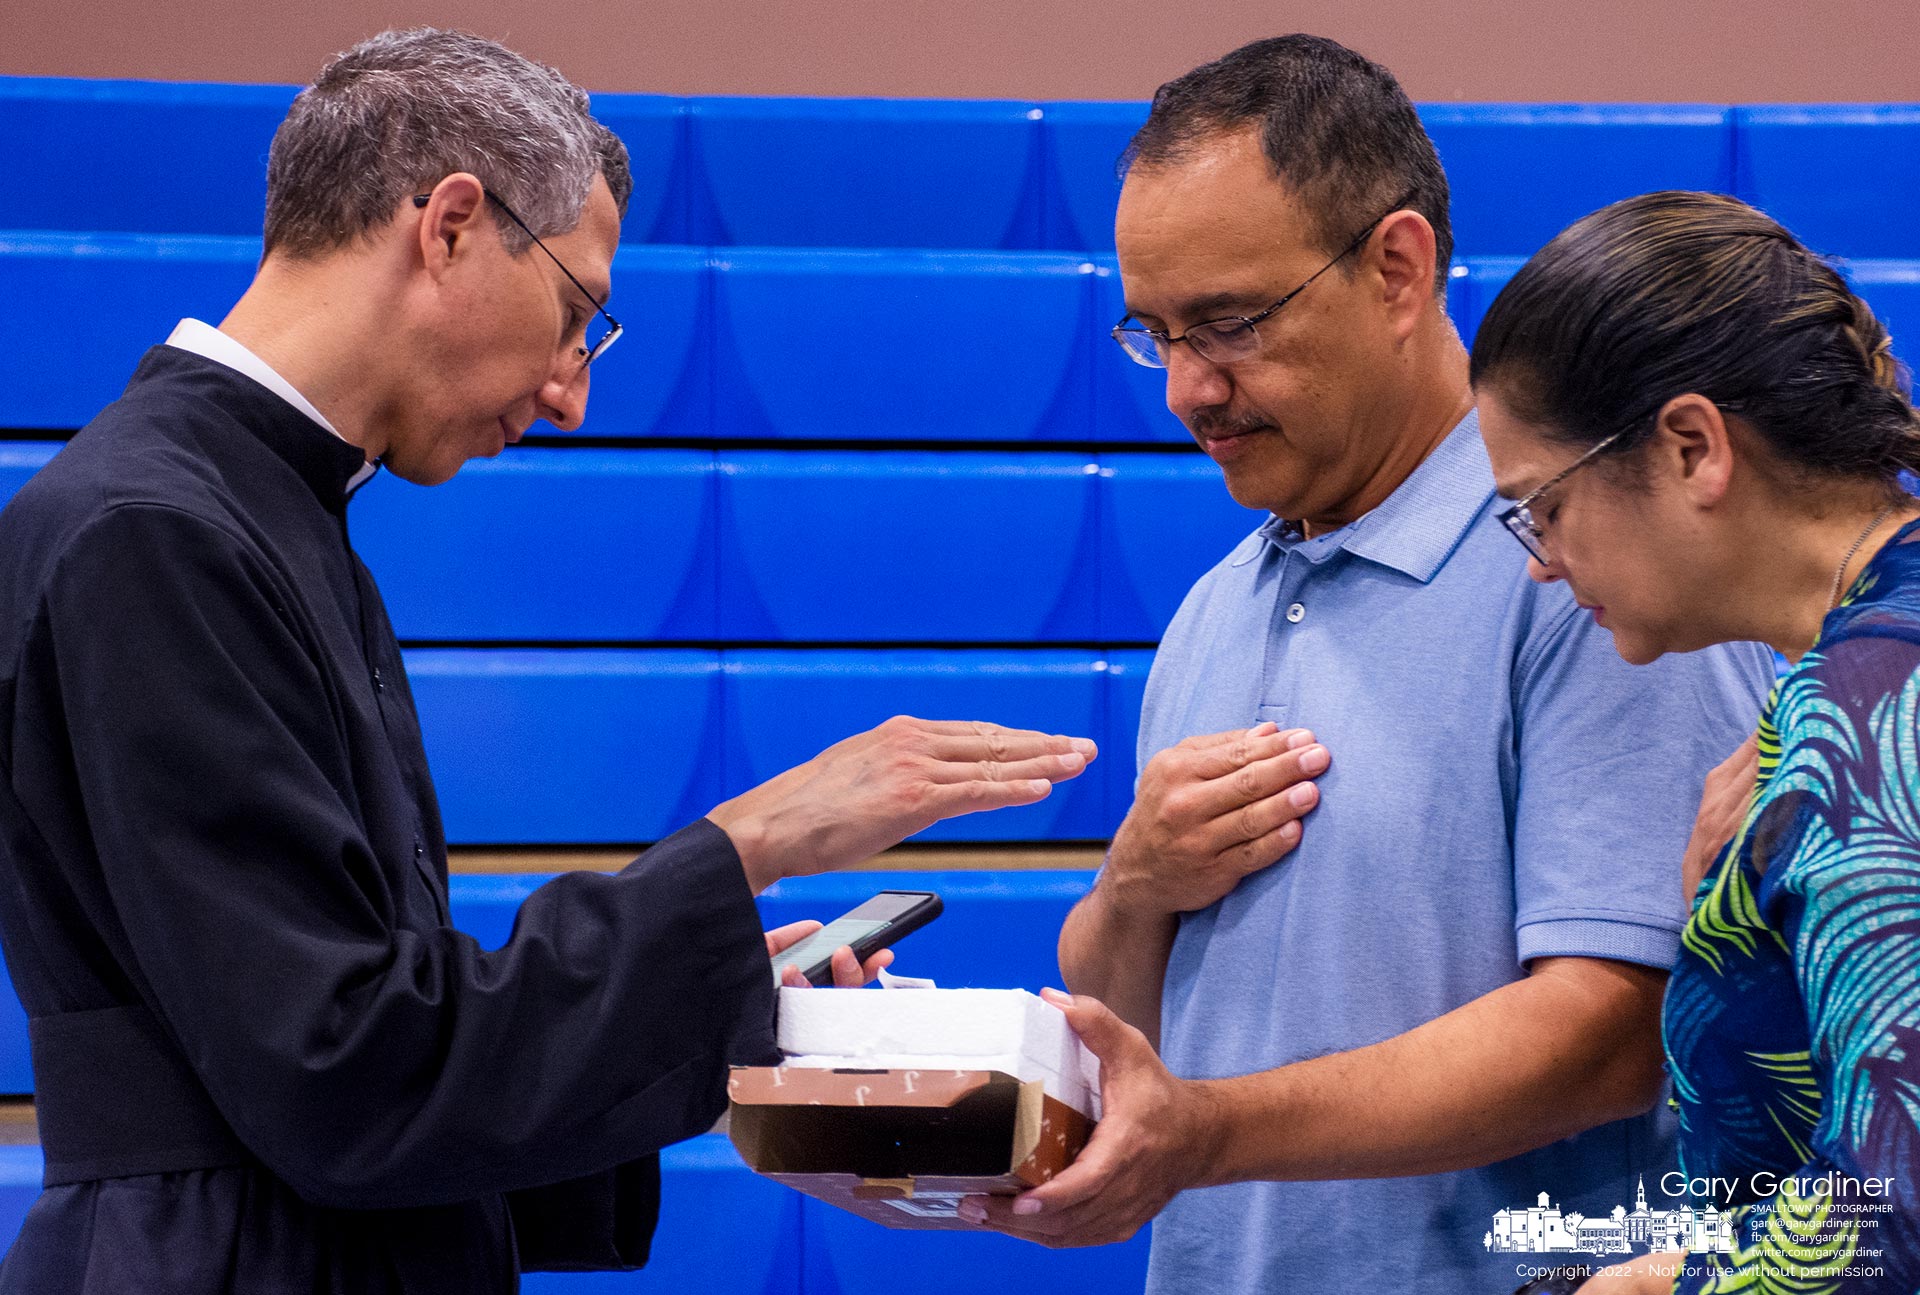 Fr. Daniel Olvera issues a blessing for a parishioner's new crucifix during a reception after the new parochial vicar for St. Paul gave his first Sunday Mass. My Final Photo for July 17, 2022.